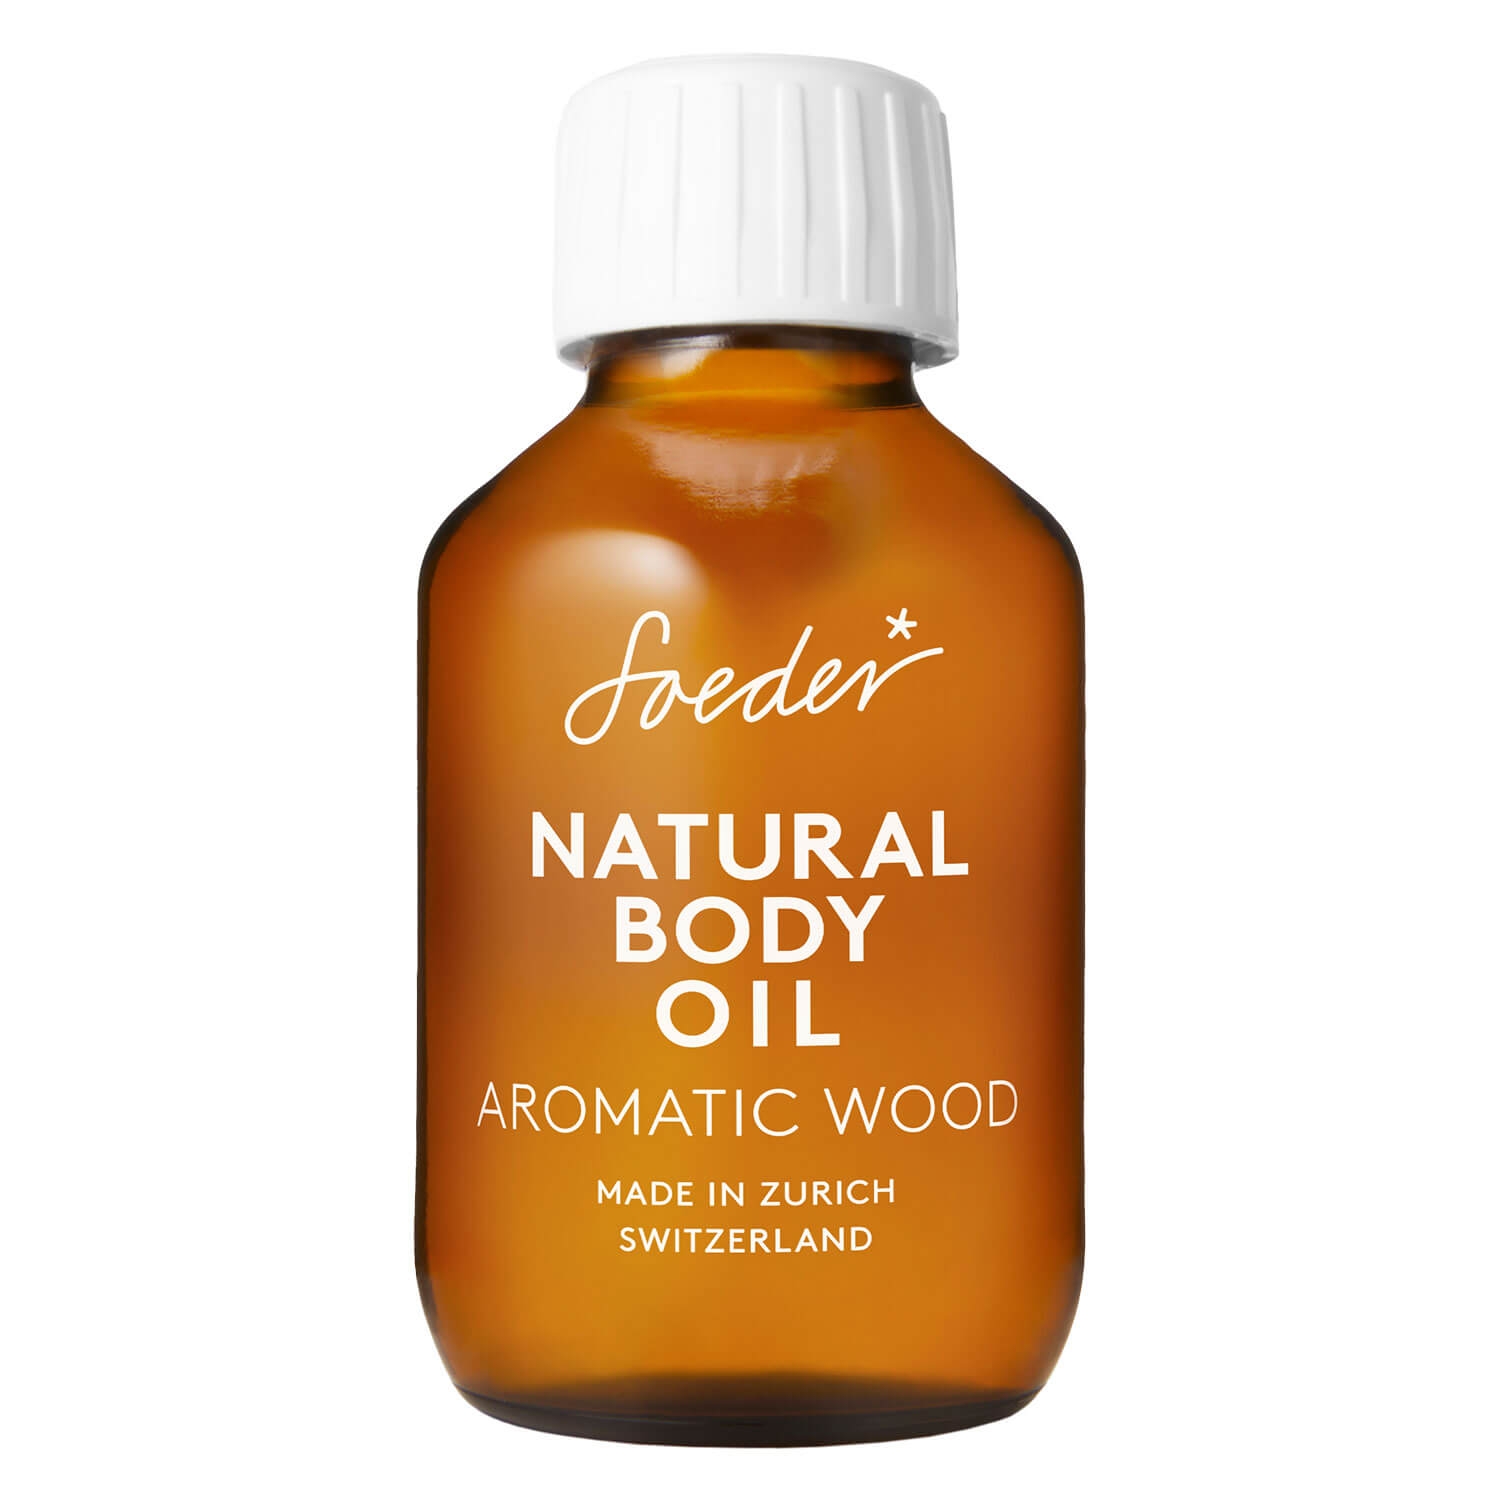 Product image from Soeder - Natural Body Oil Aromatic Wood